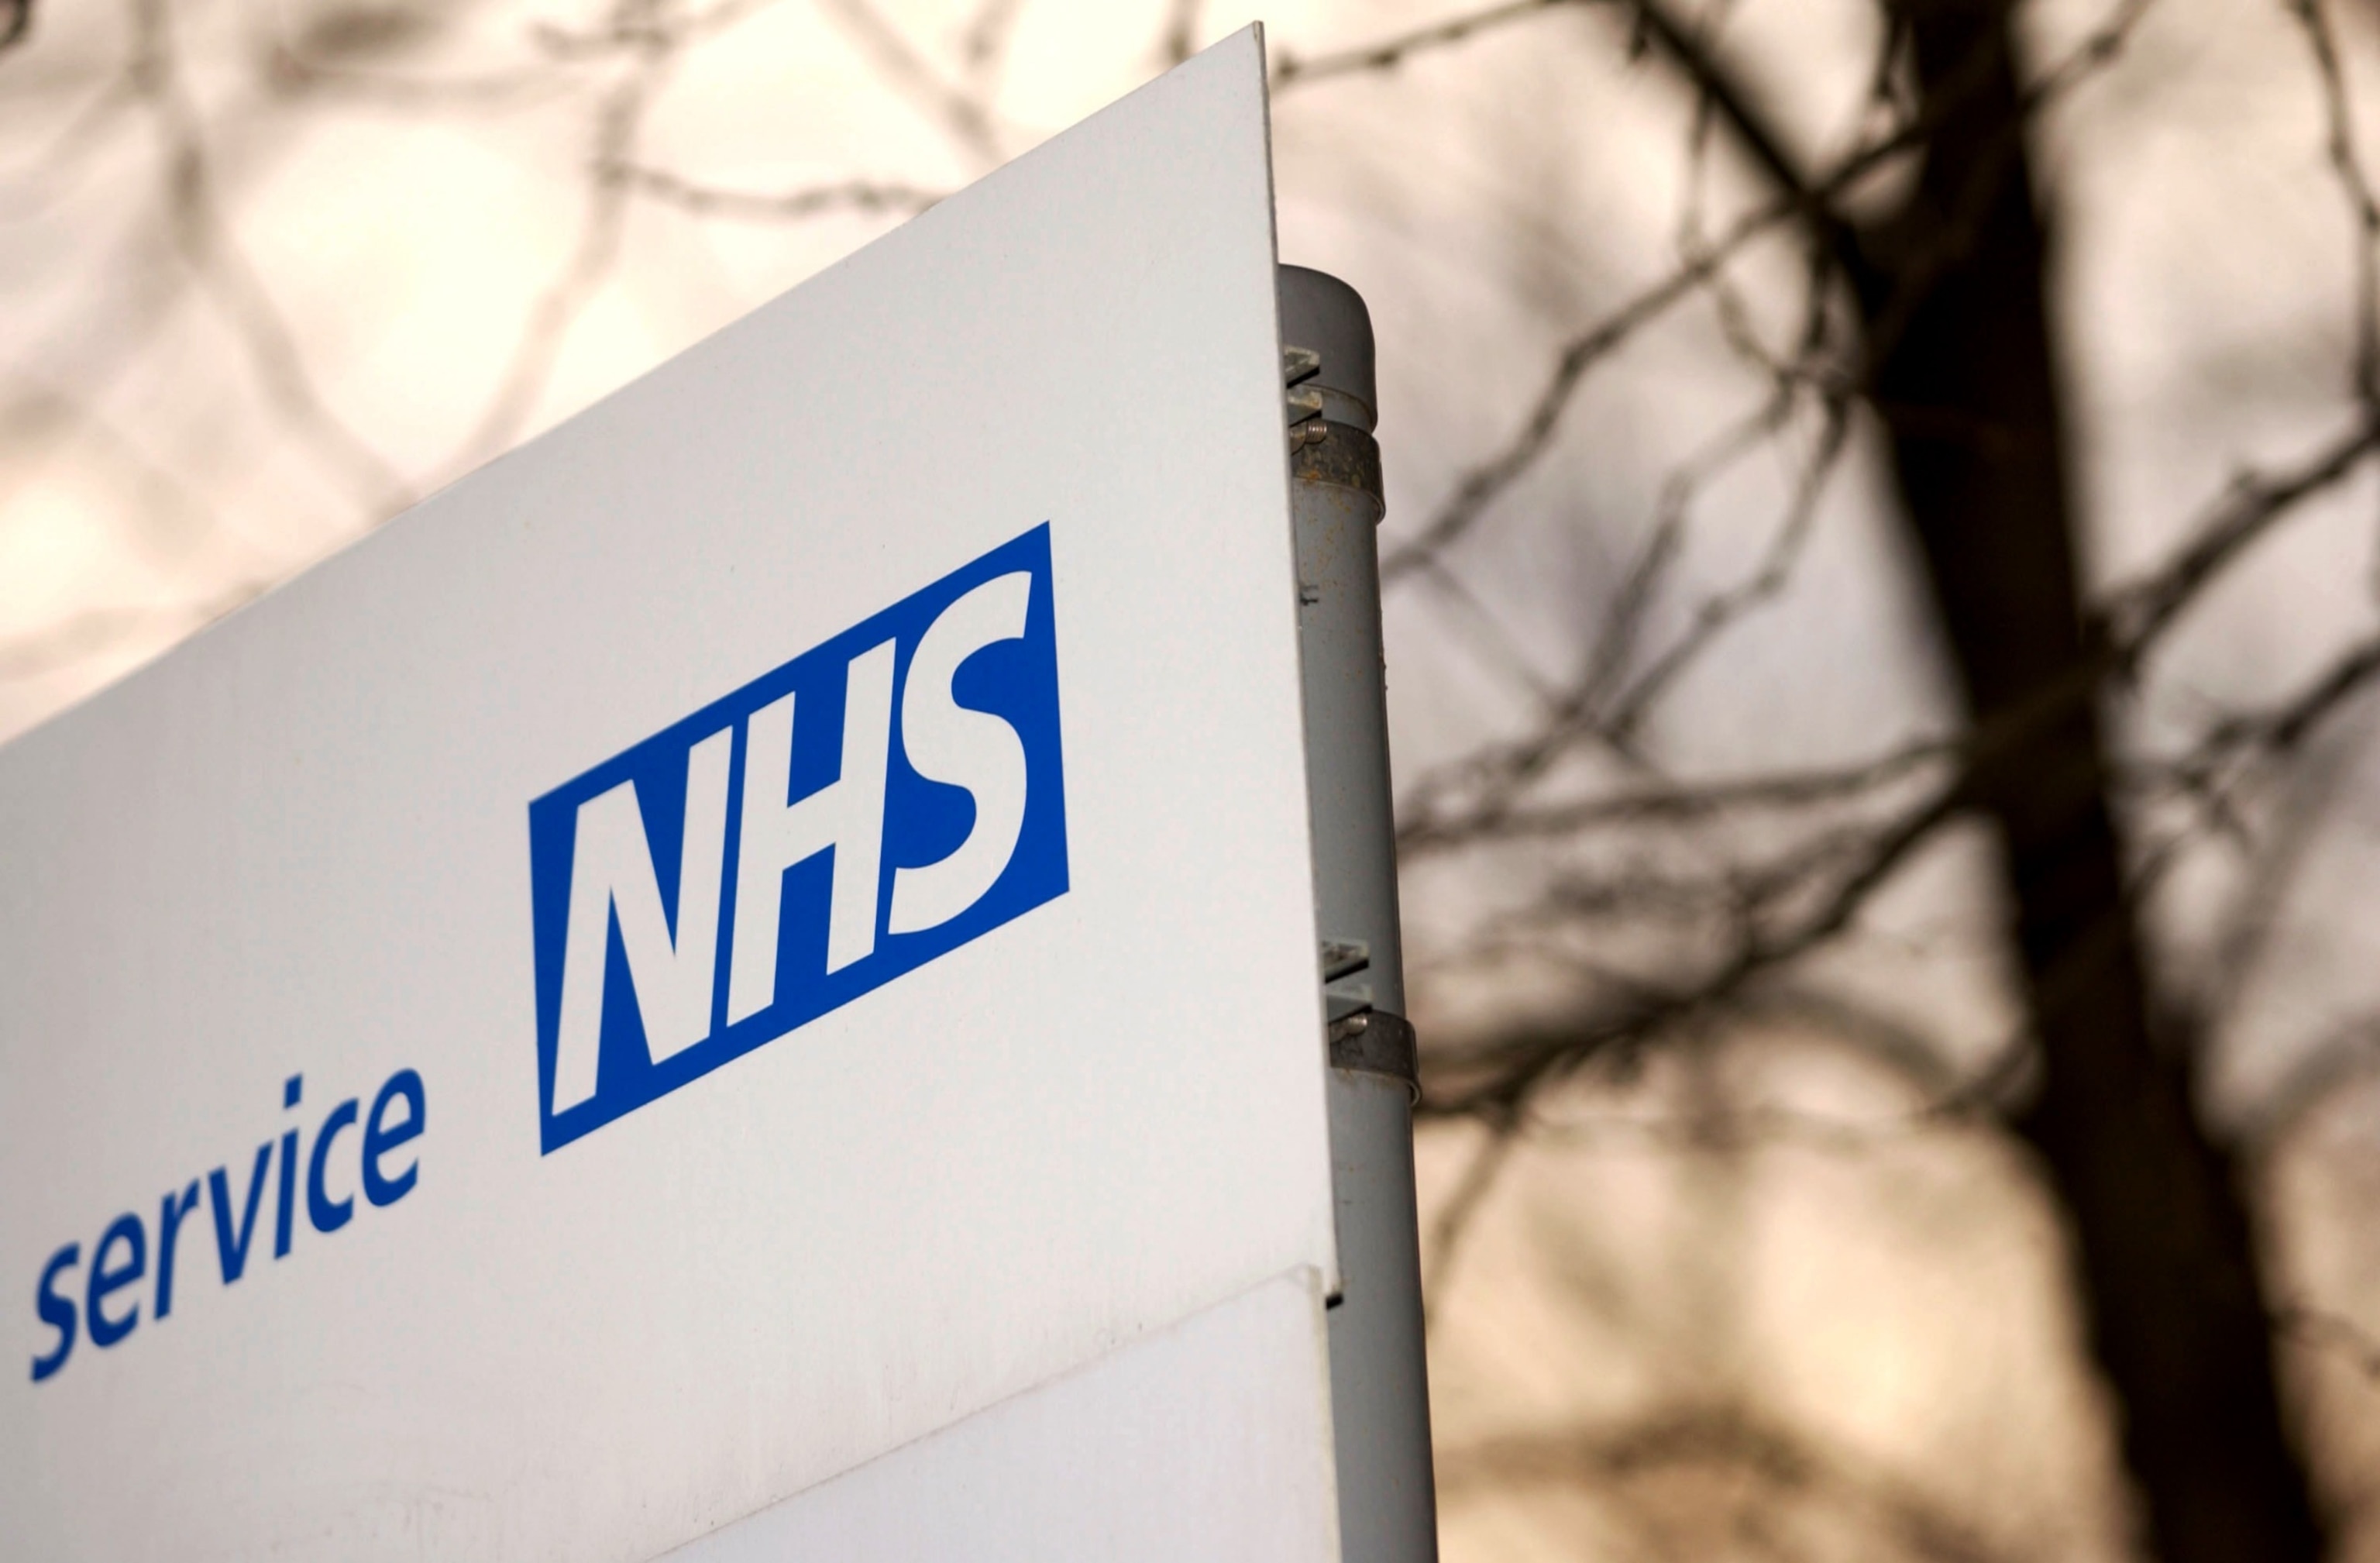 PHOTO: A National Health Service (NHS) sign is shown February 19, 2003 in London, England.